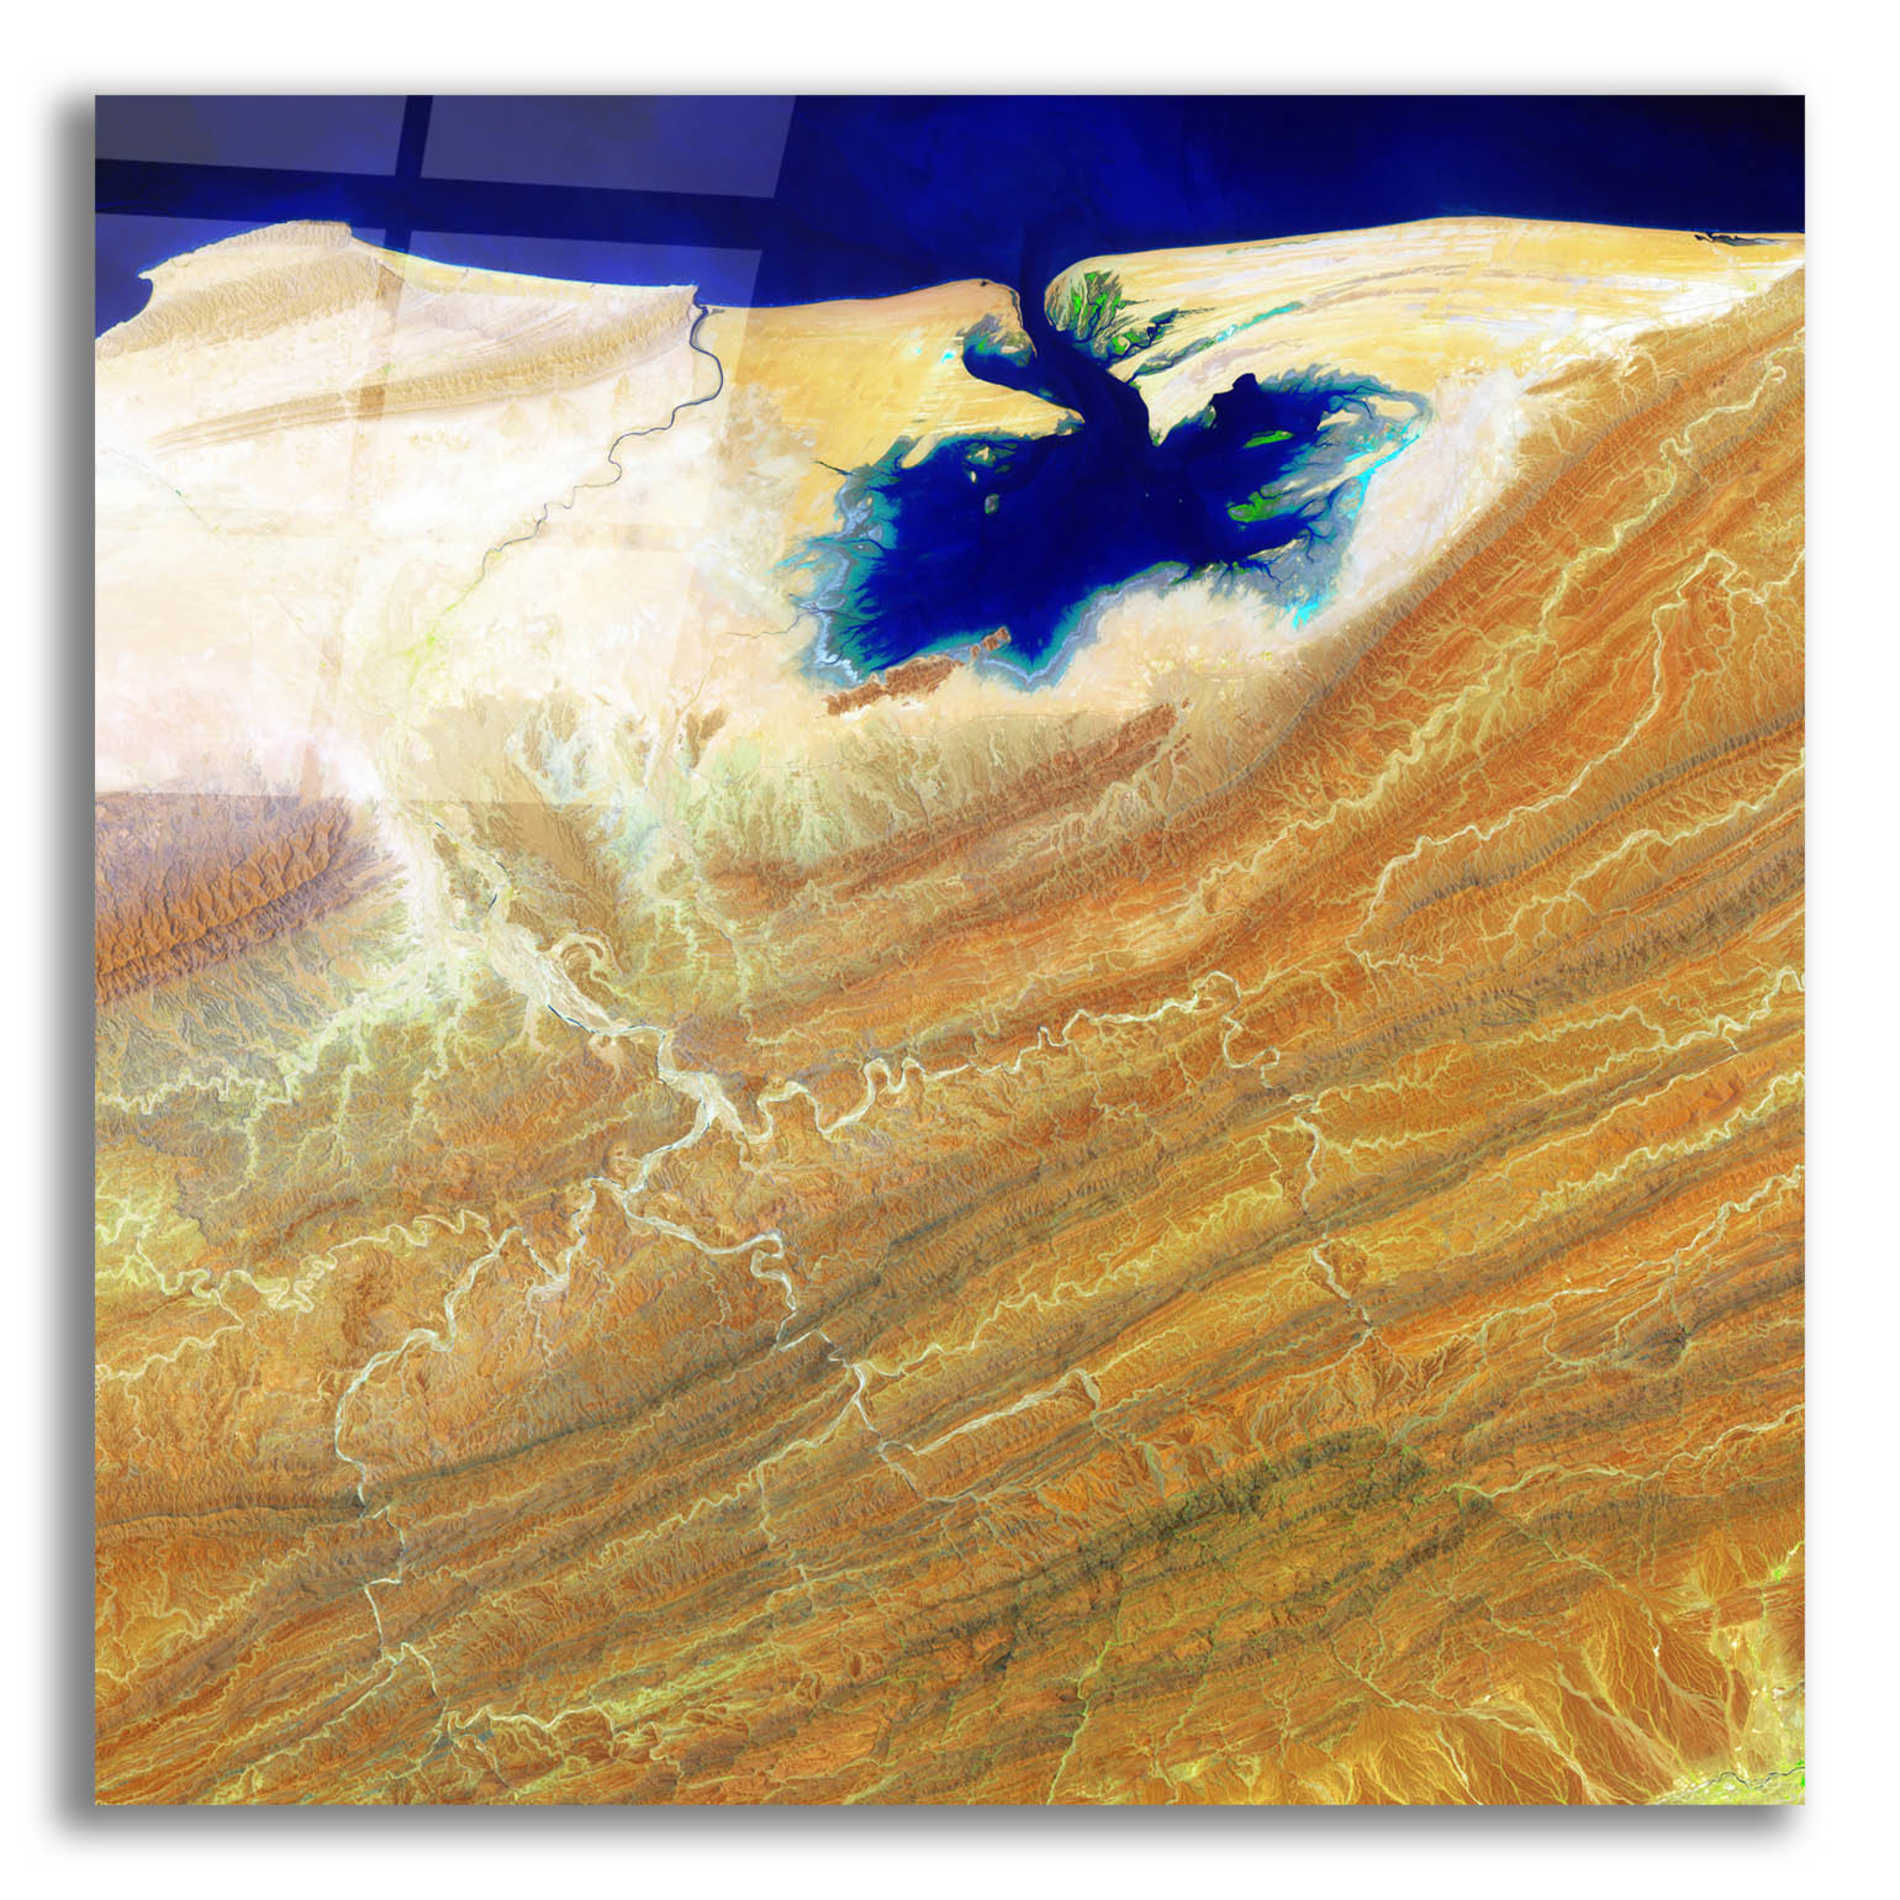 Epic Art 'Earth as Art: Ink Stain,' Acrylic Glass Wall Art,12x12x1.1x0,18x18x1.1x0,26x26x1.74x0,37x37x1.74x0